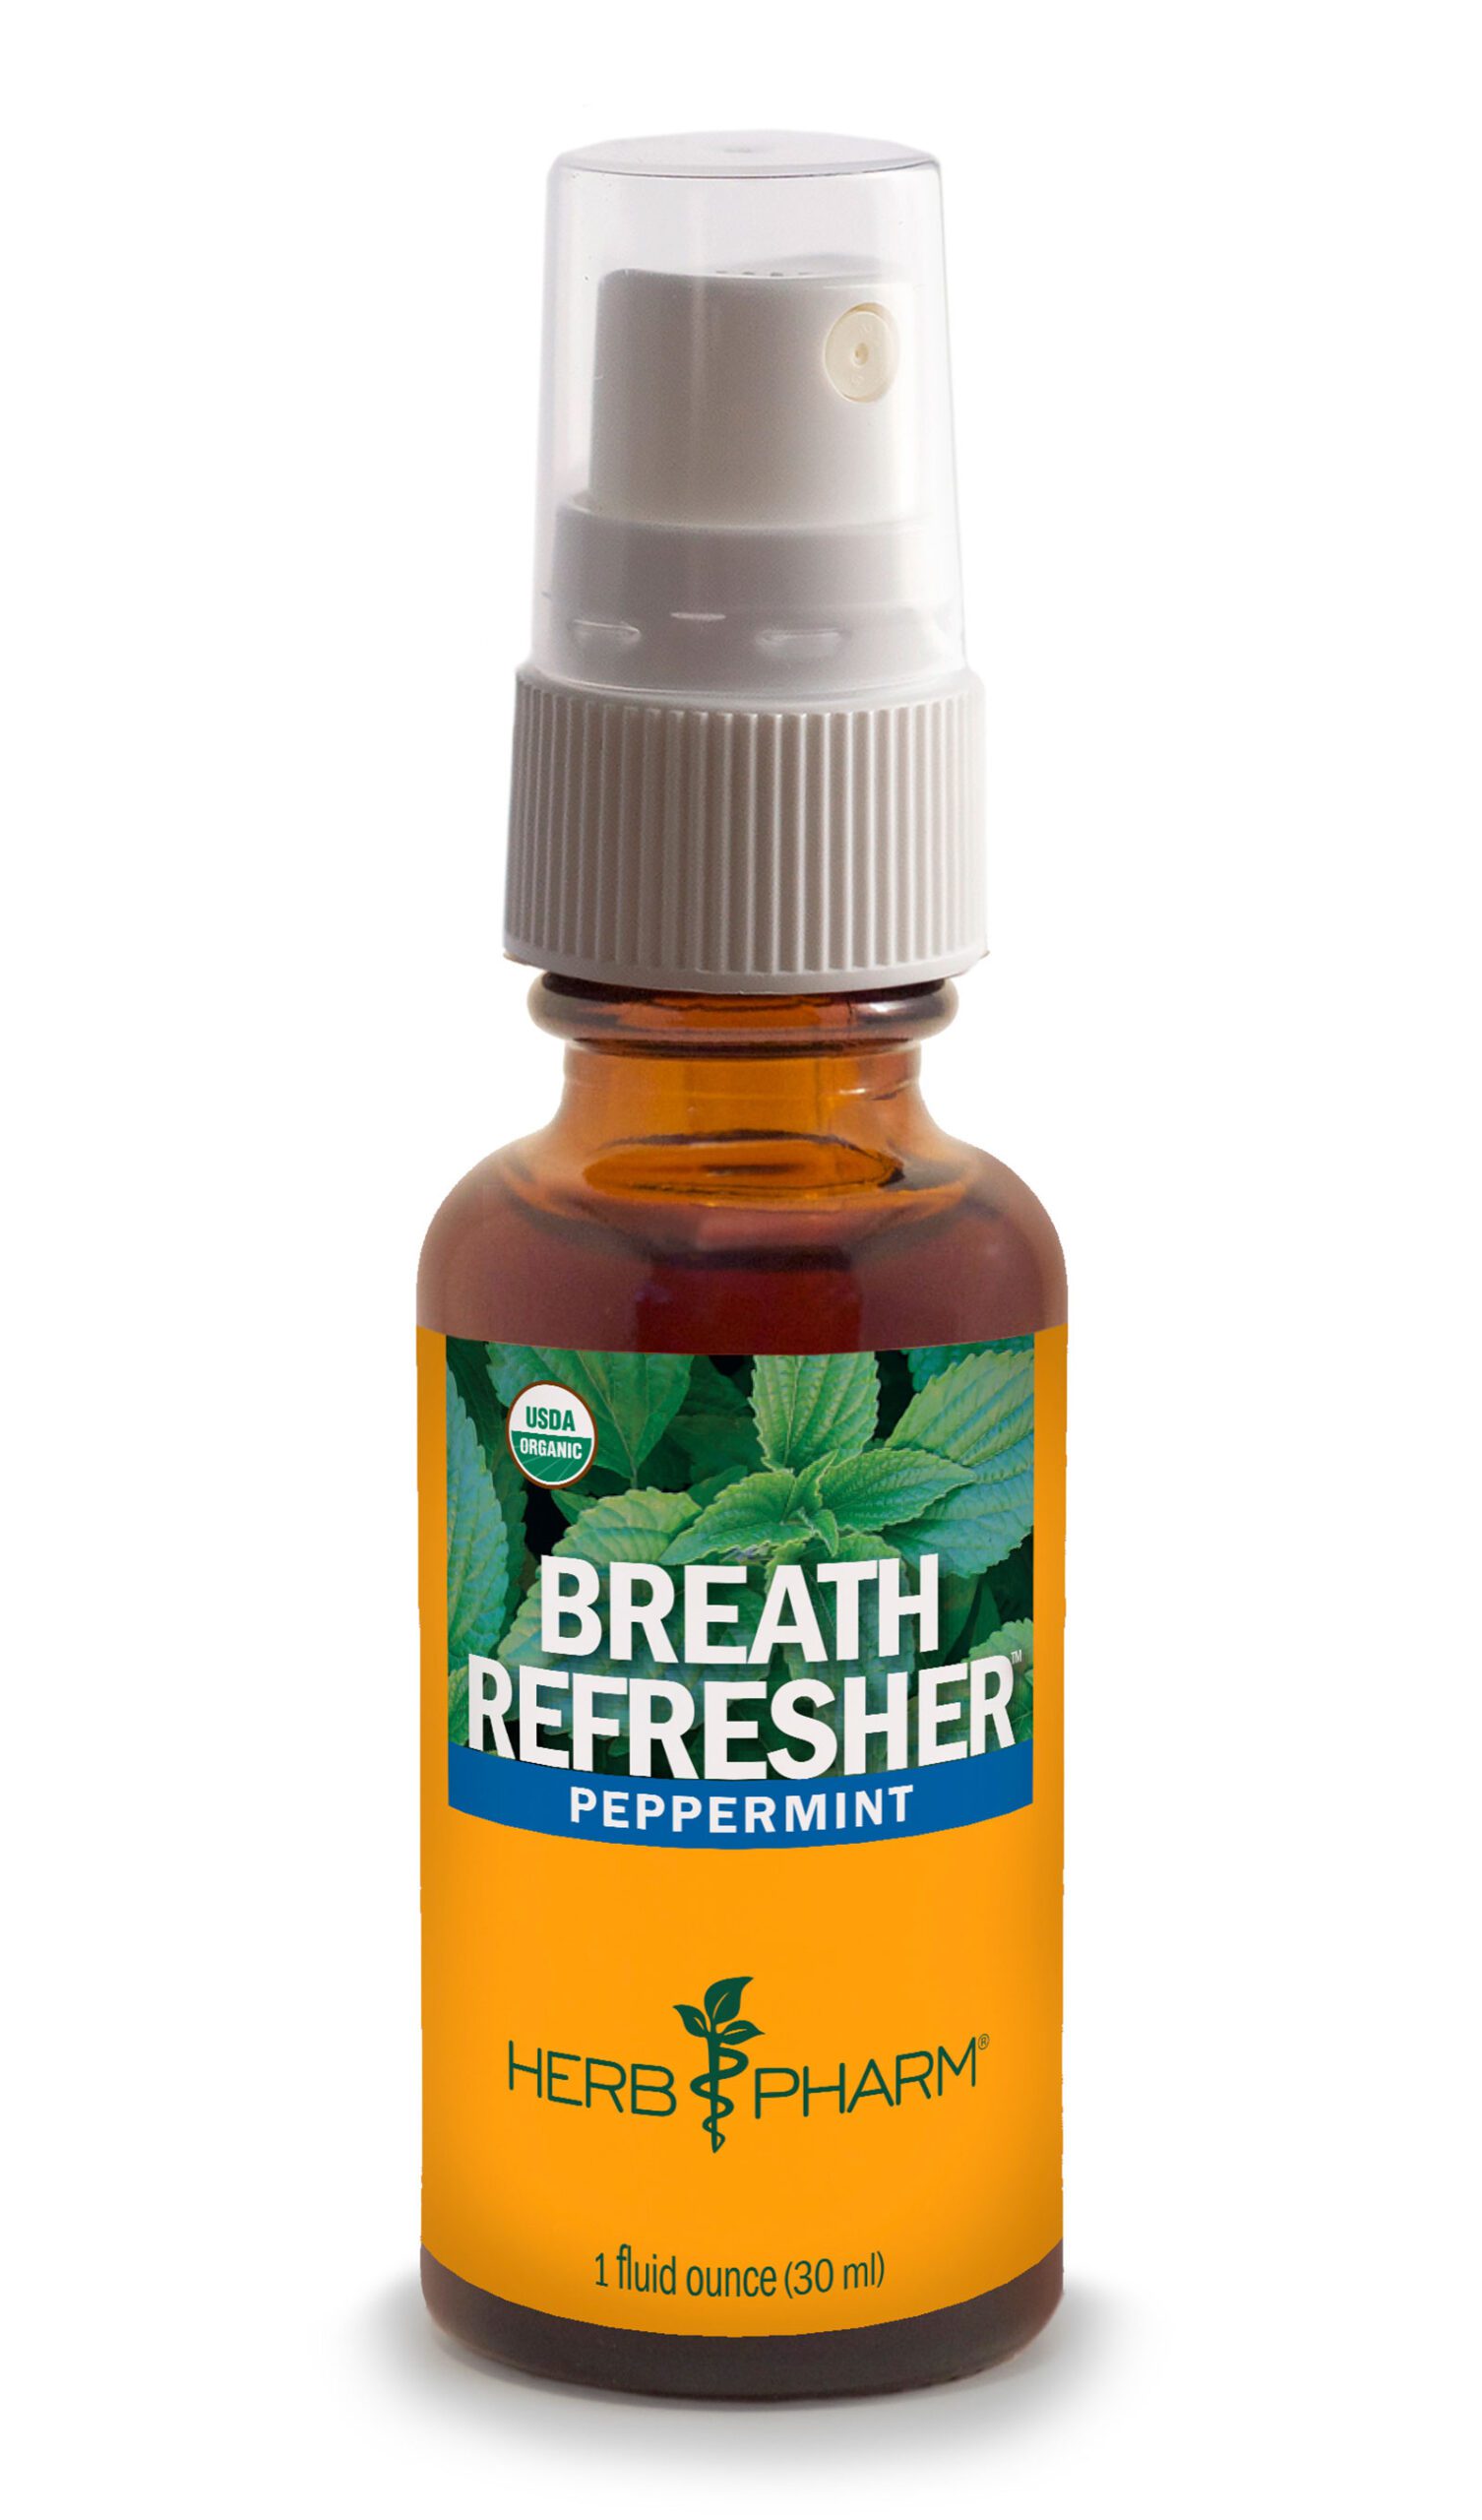 Product Listing Image for Herb Pharm Breath Refresher Peppermint .5oz